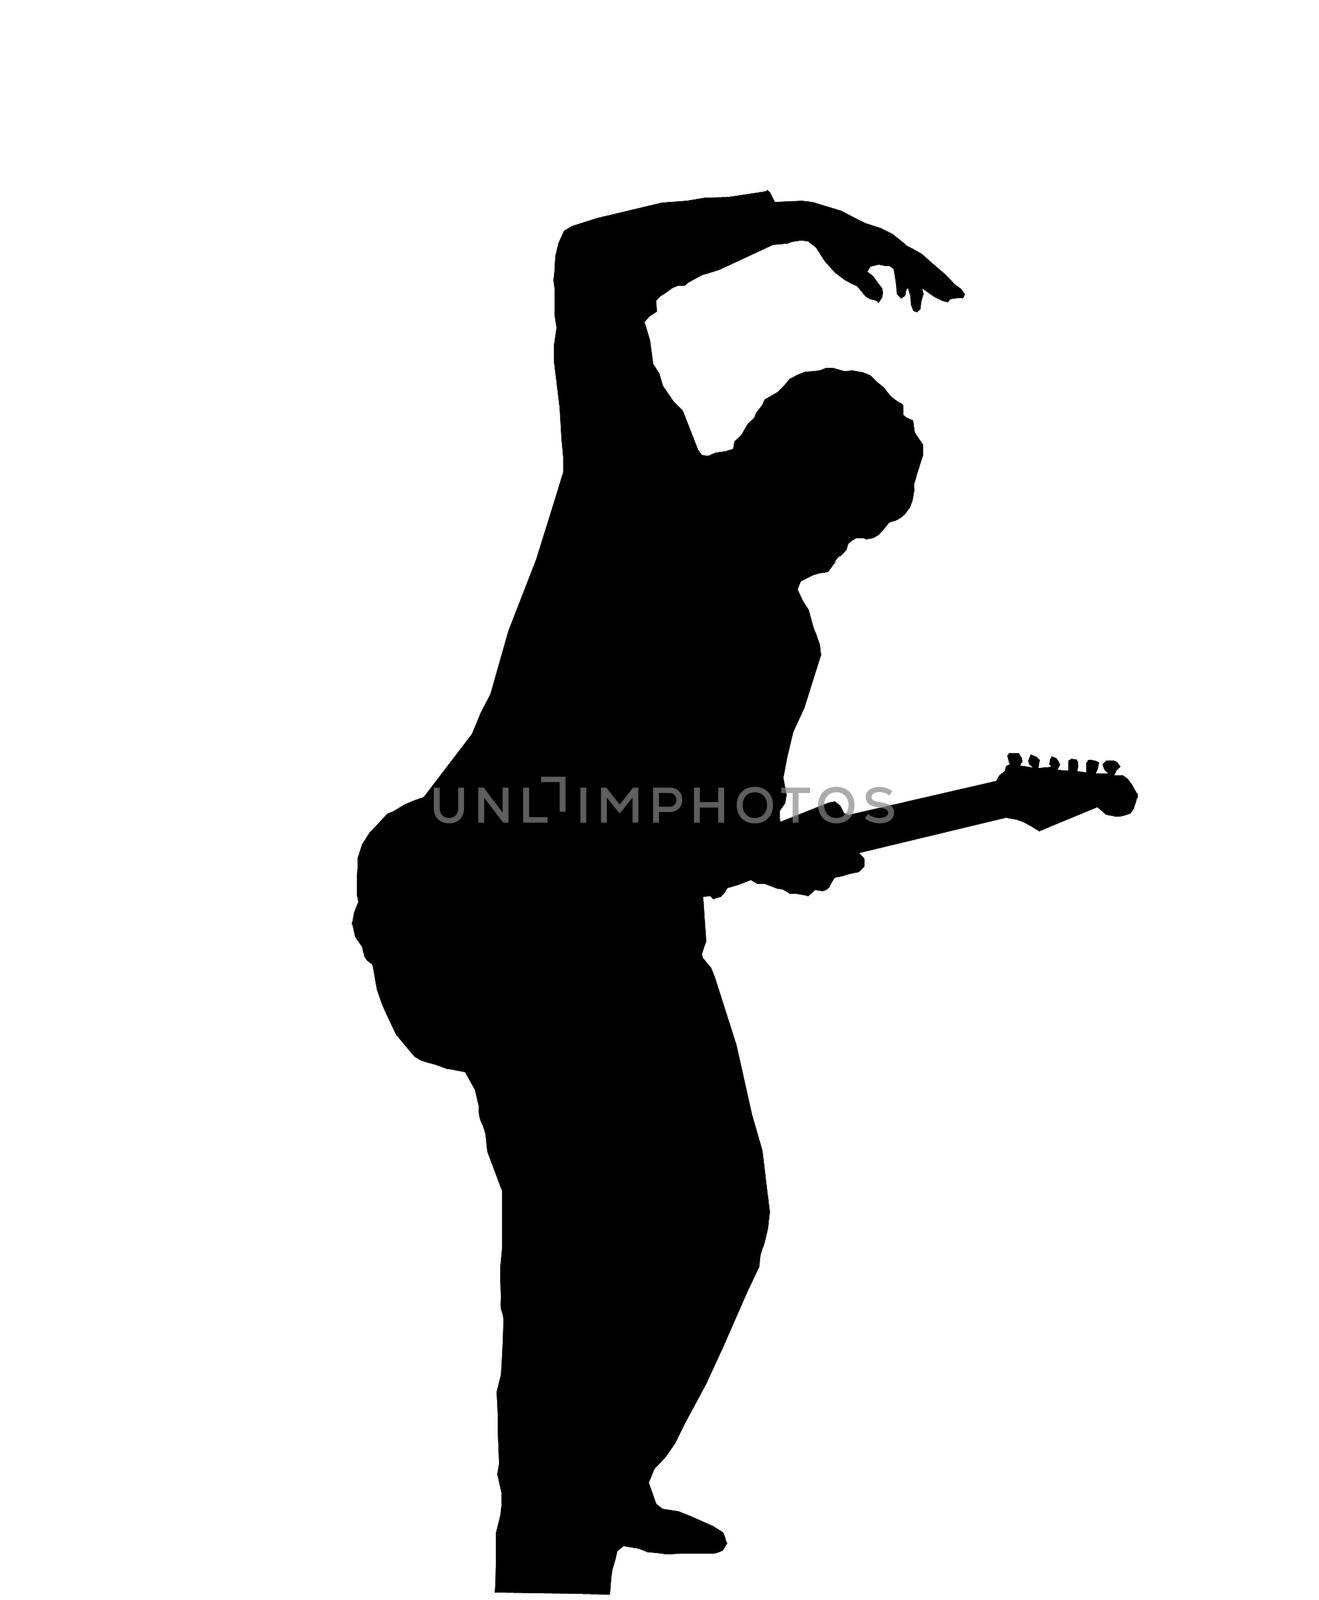 Black silhouette of guitarist on white background